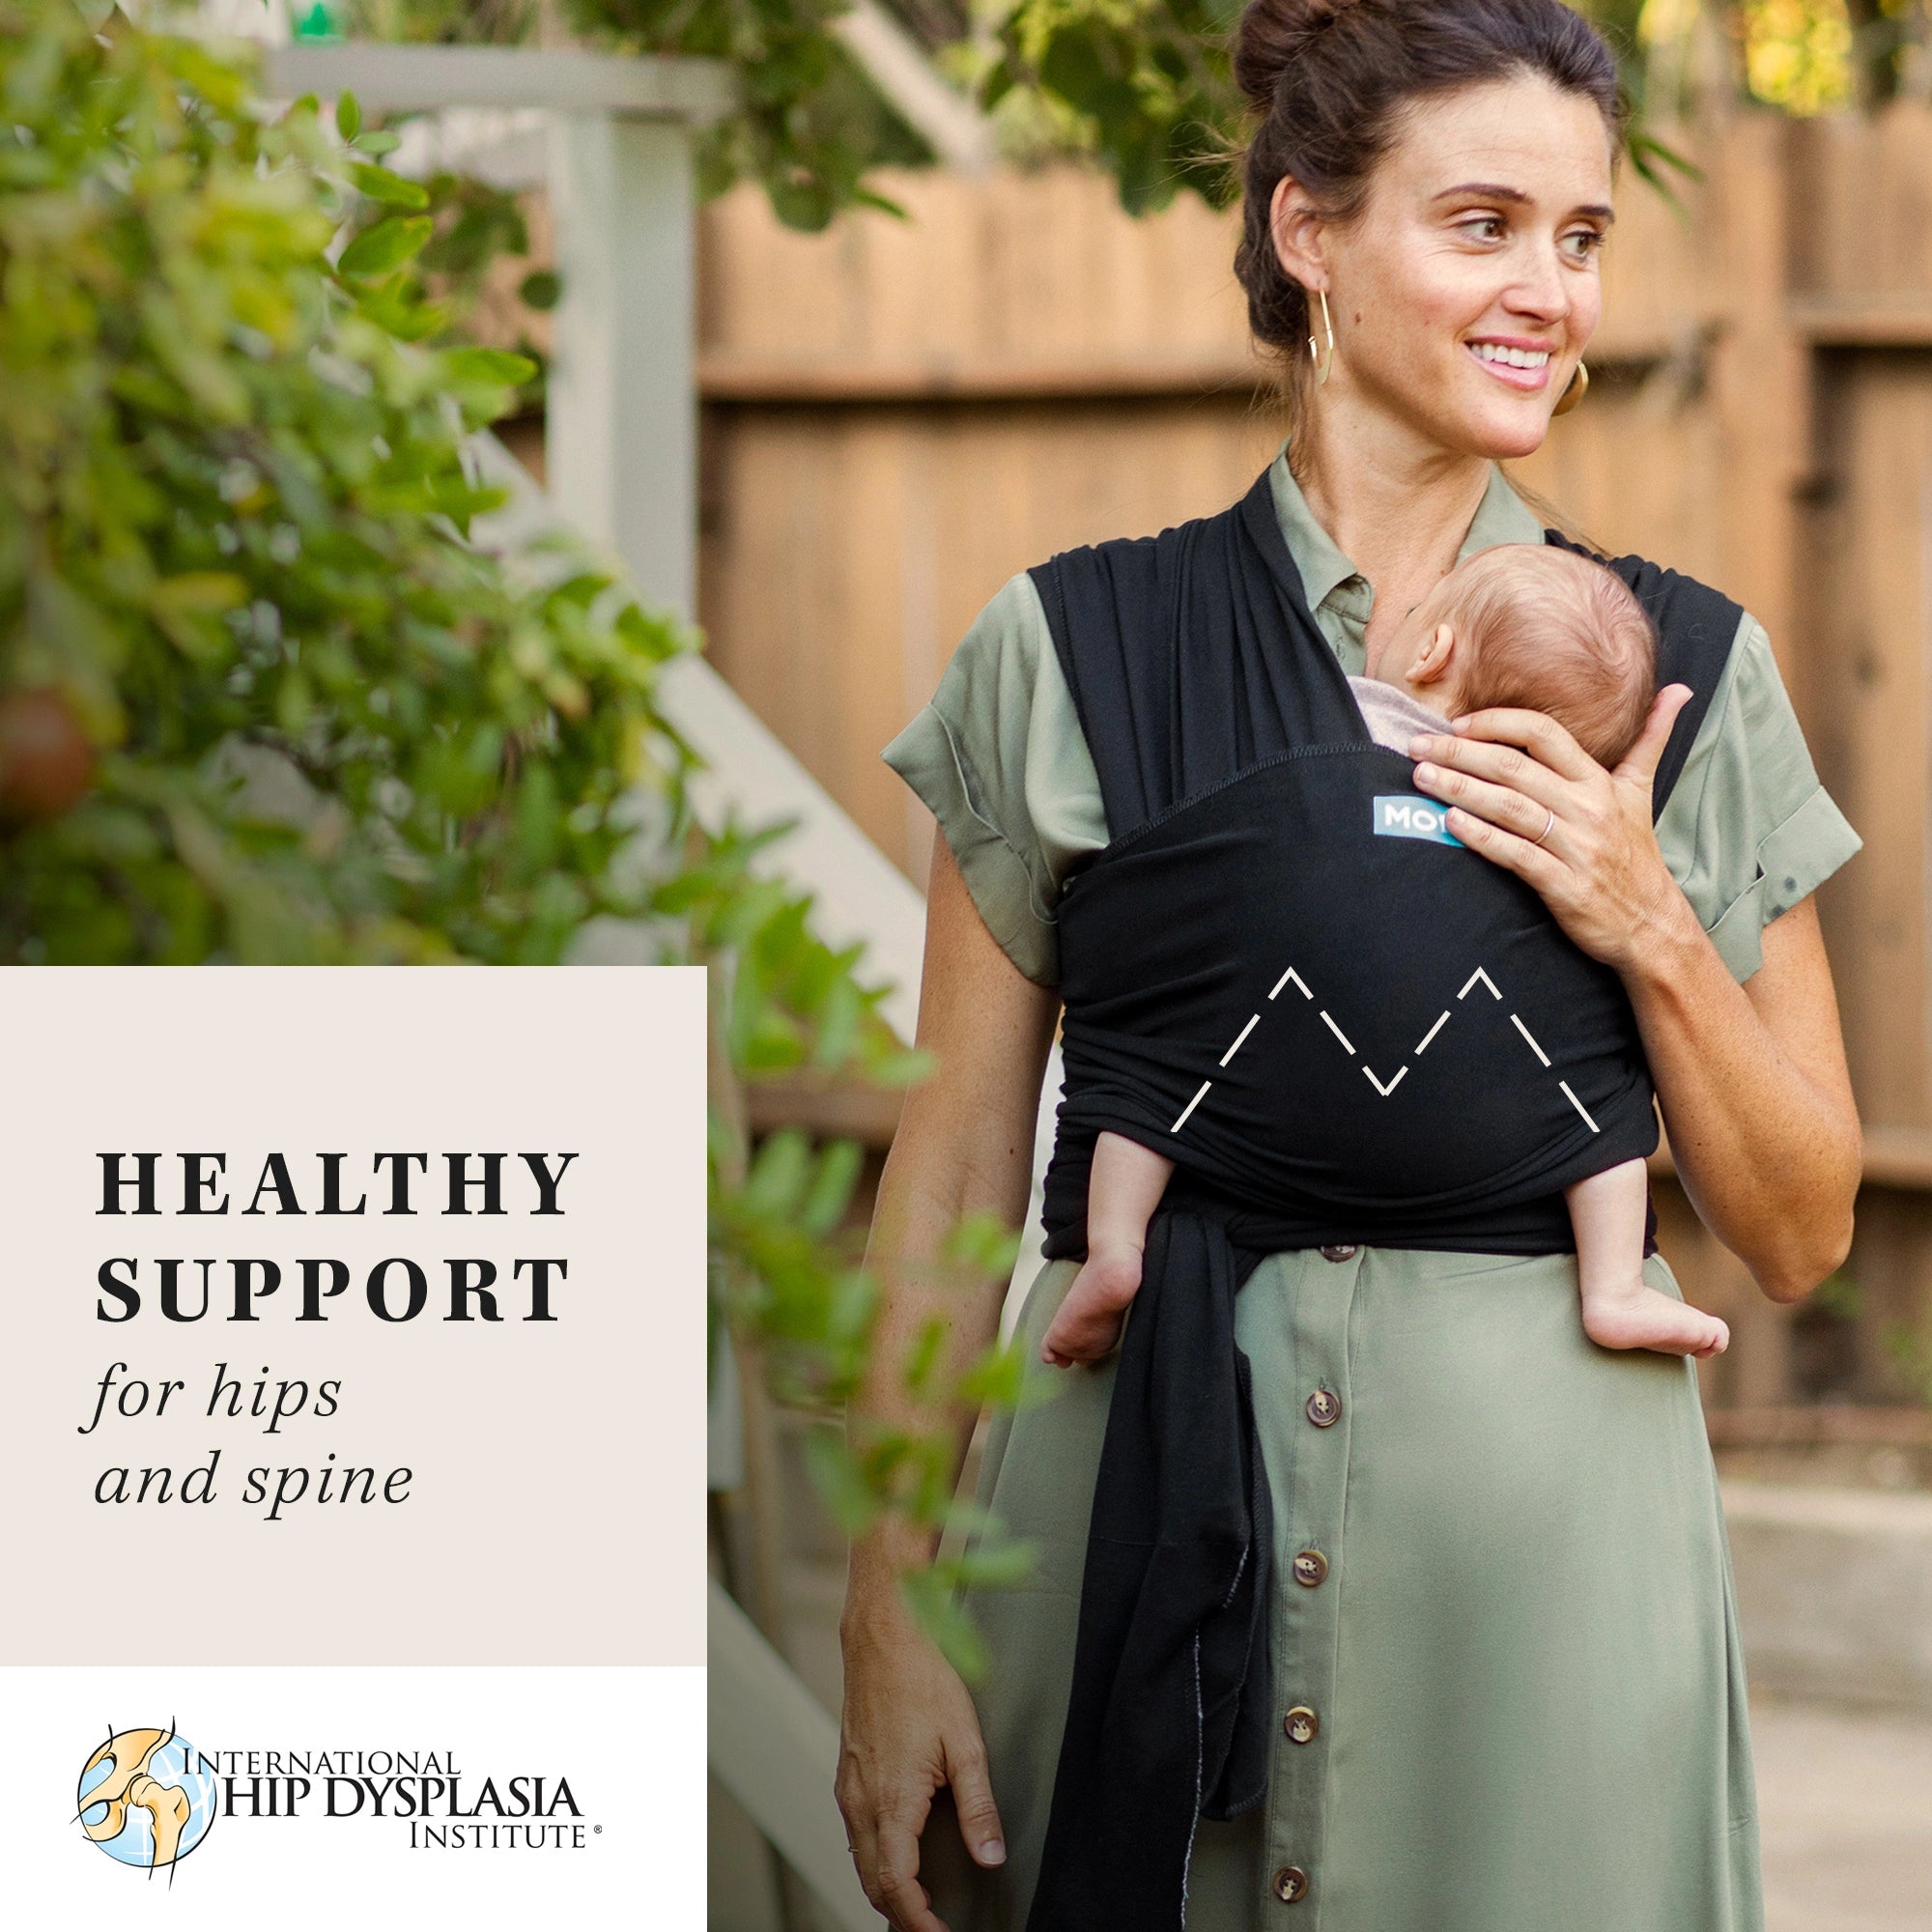 moby wrap features hip healthy support for growing babies as endorsed by international hip dysplasia institute